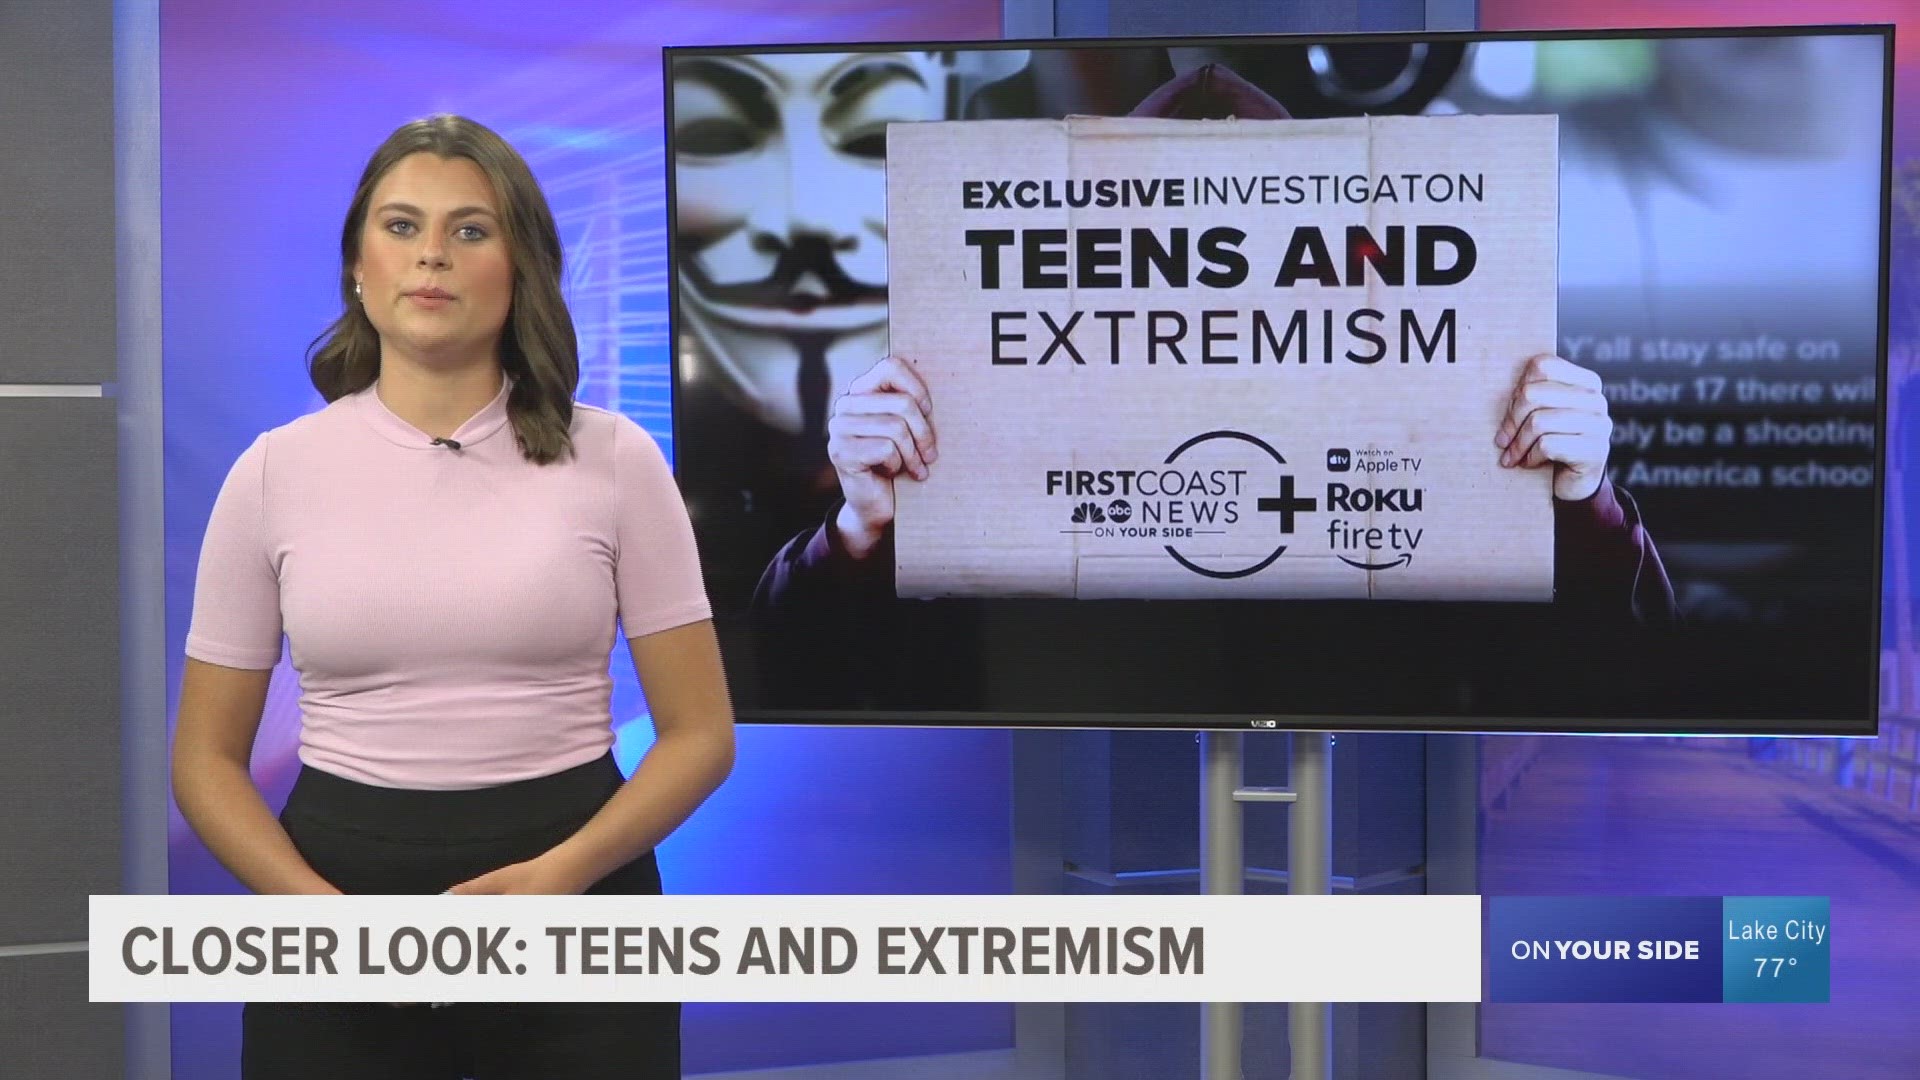 The FBI and local law enforcement says it's becoming easier for extremist individuals and groups to recruit young people to spread negative messages online.